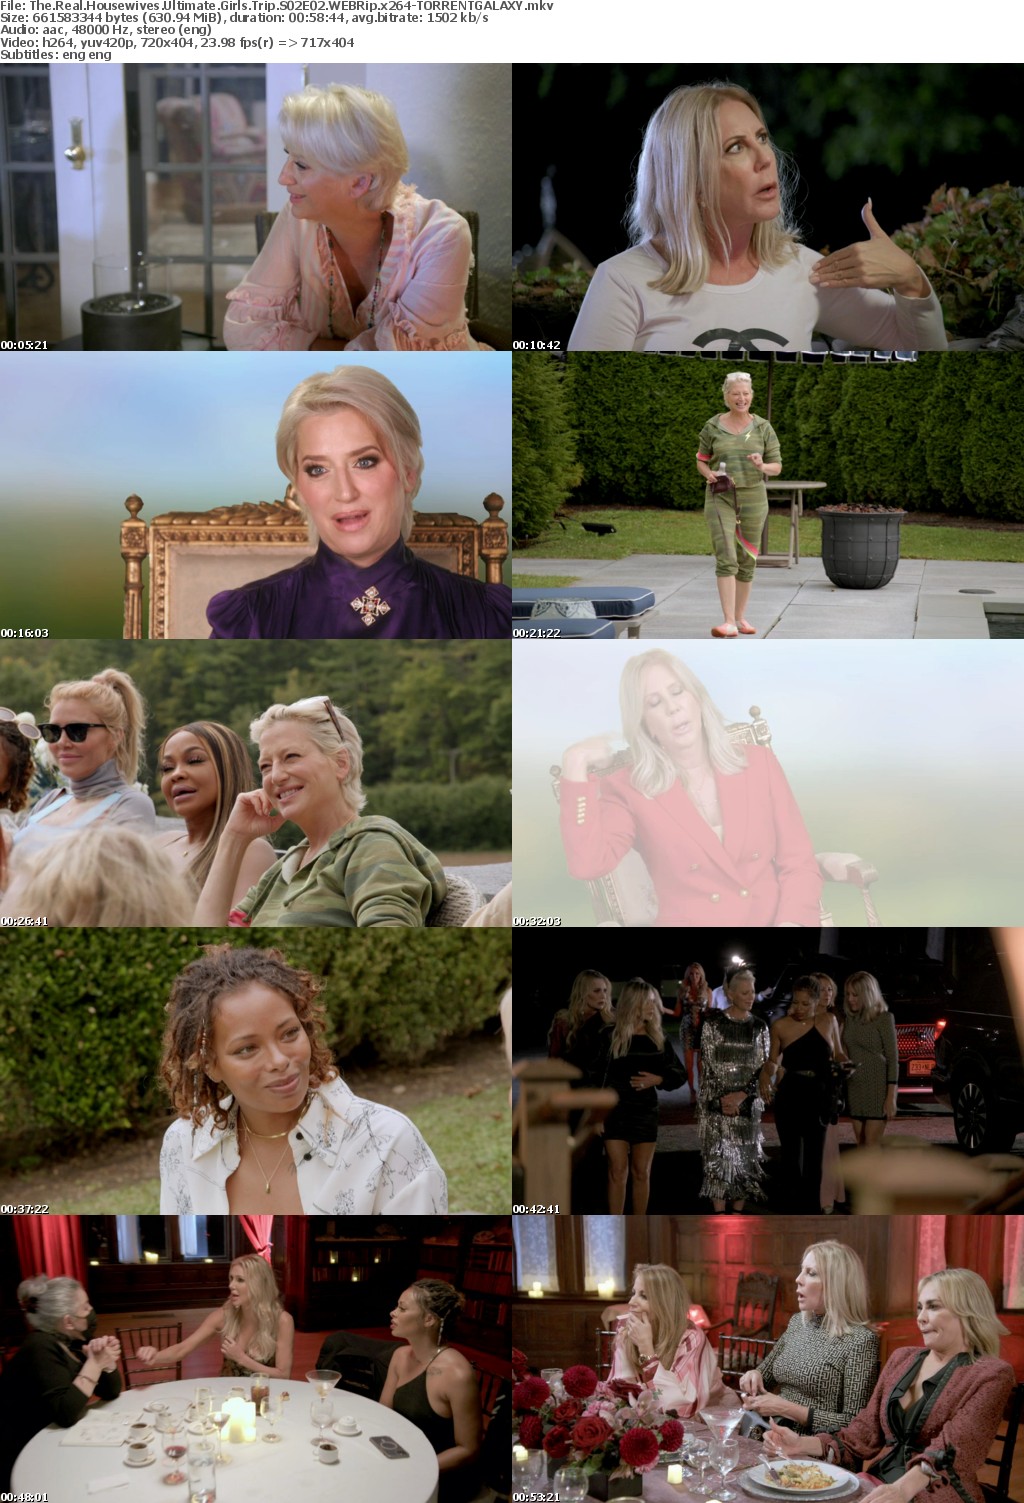 The Real Housewives Ultimate Girls Trip S02E02 WEBRip x264-GALAXY